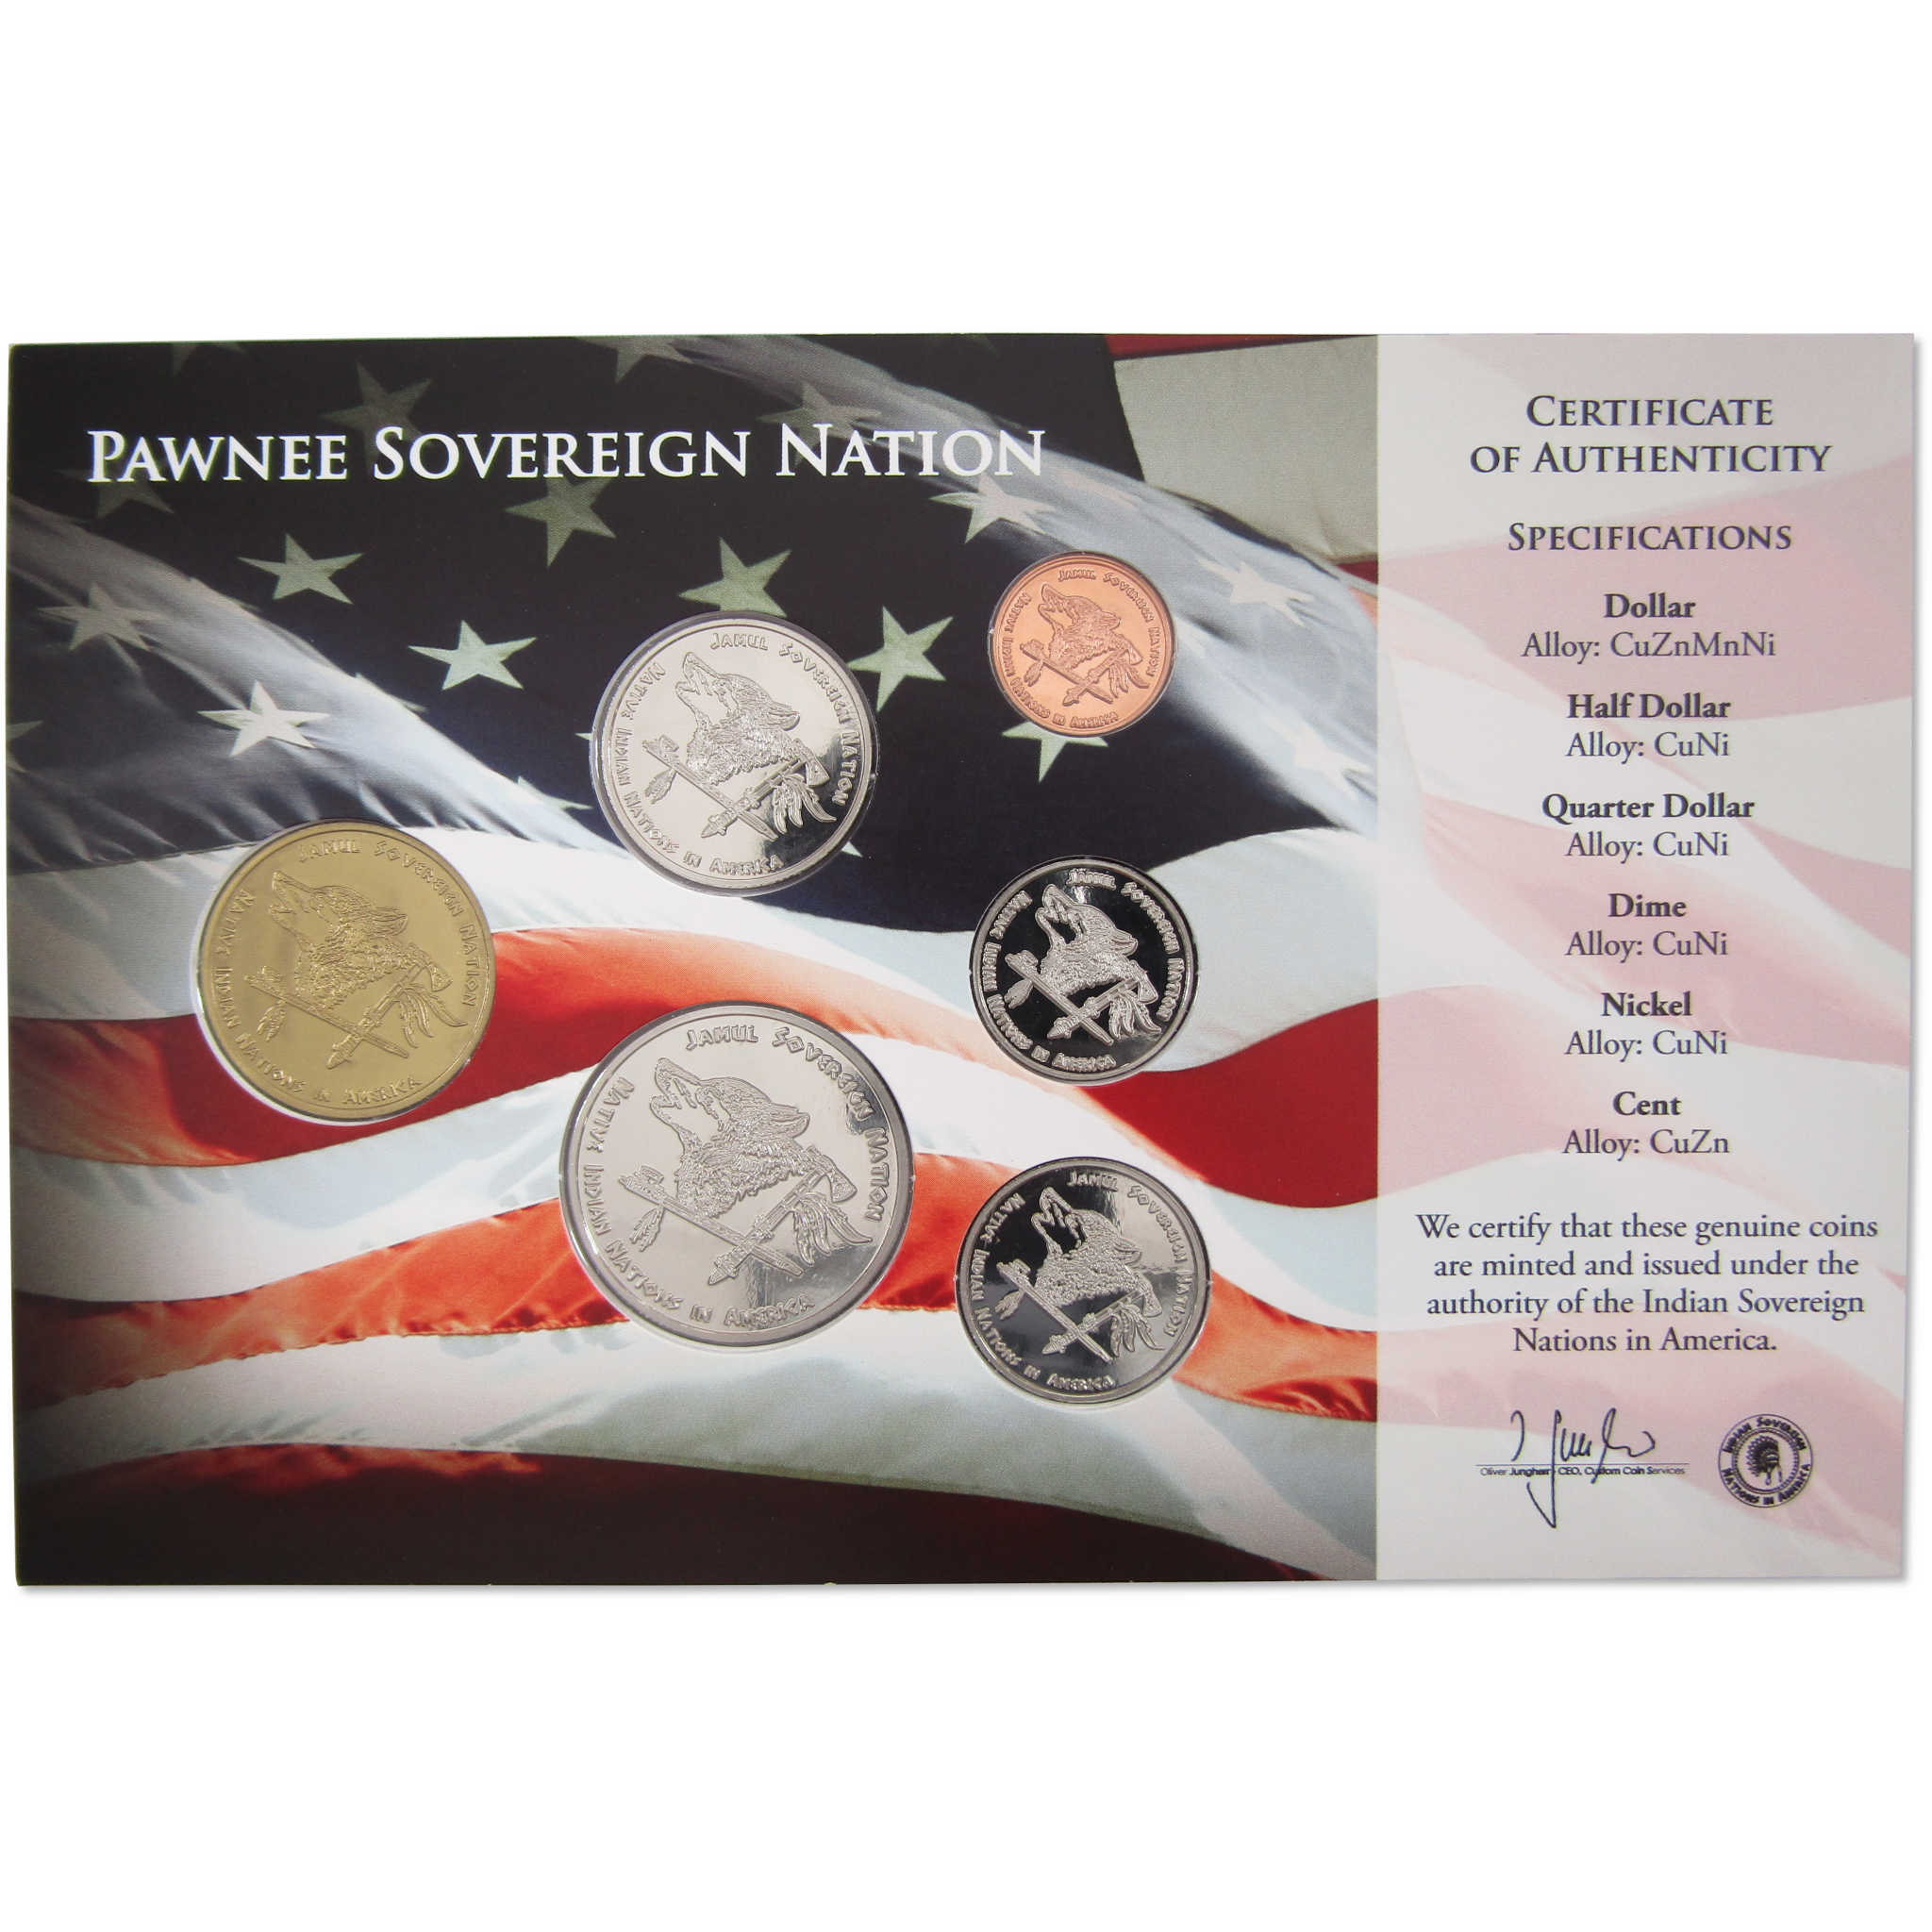 2020 Jamul Native American Pawnee Sovereign Nation Uncirculated Coin Set